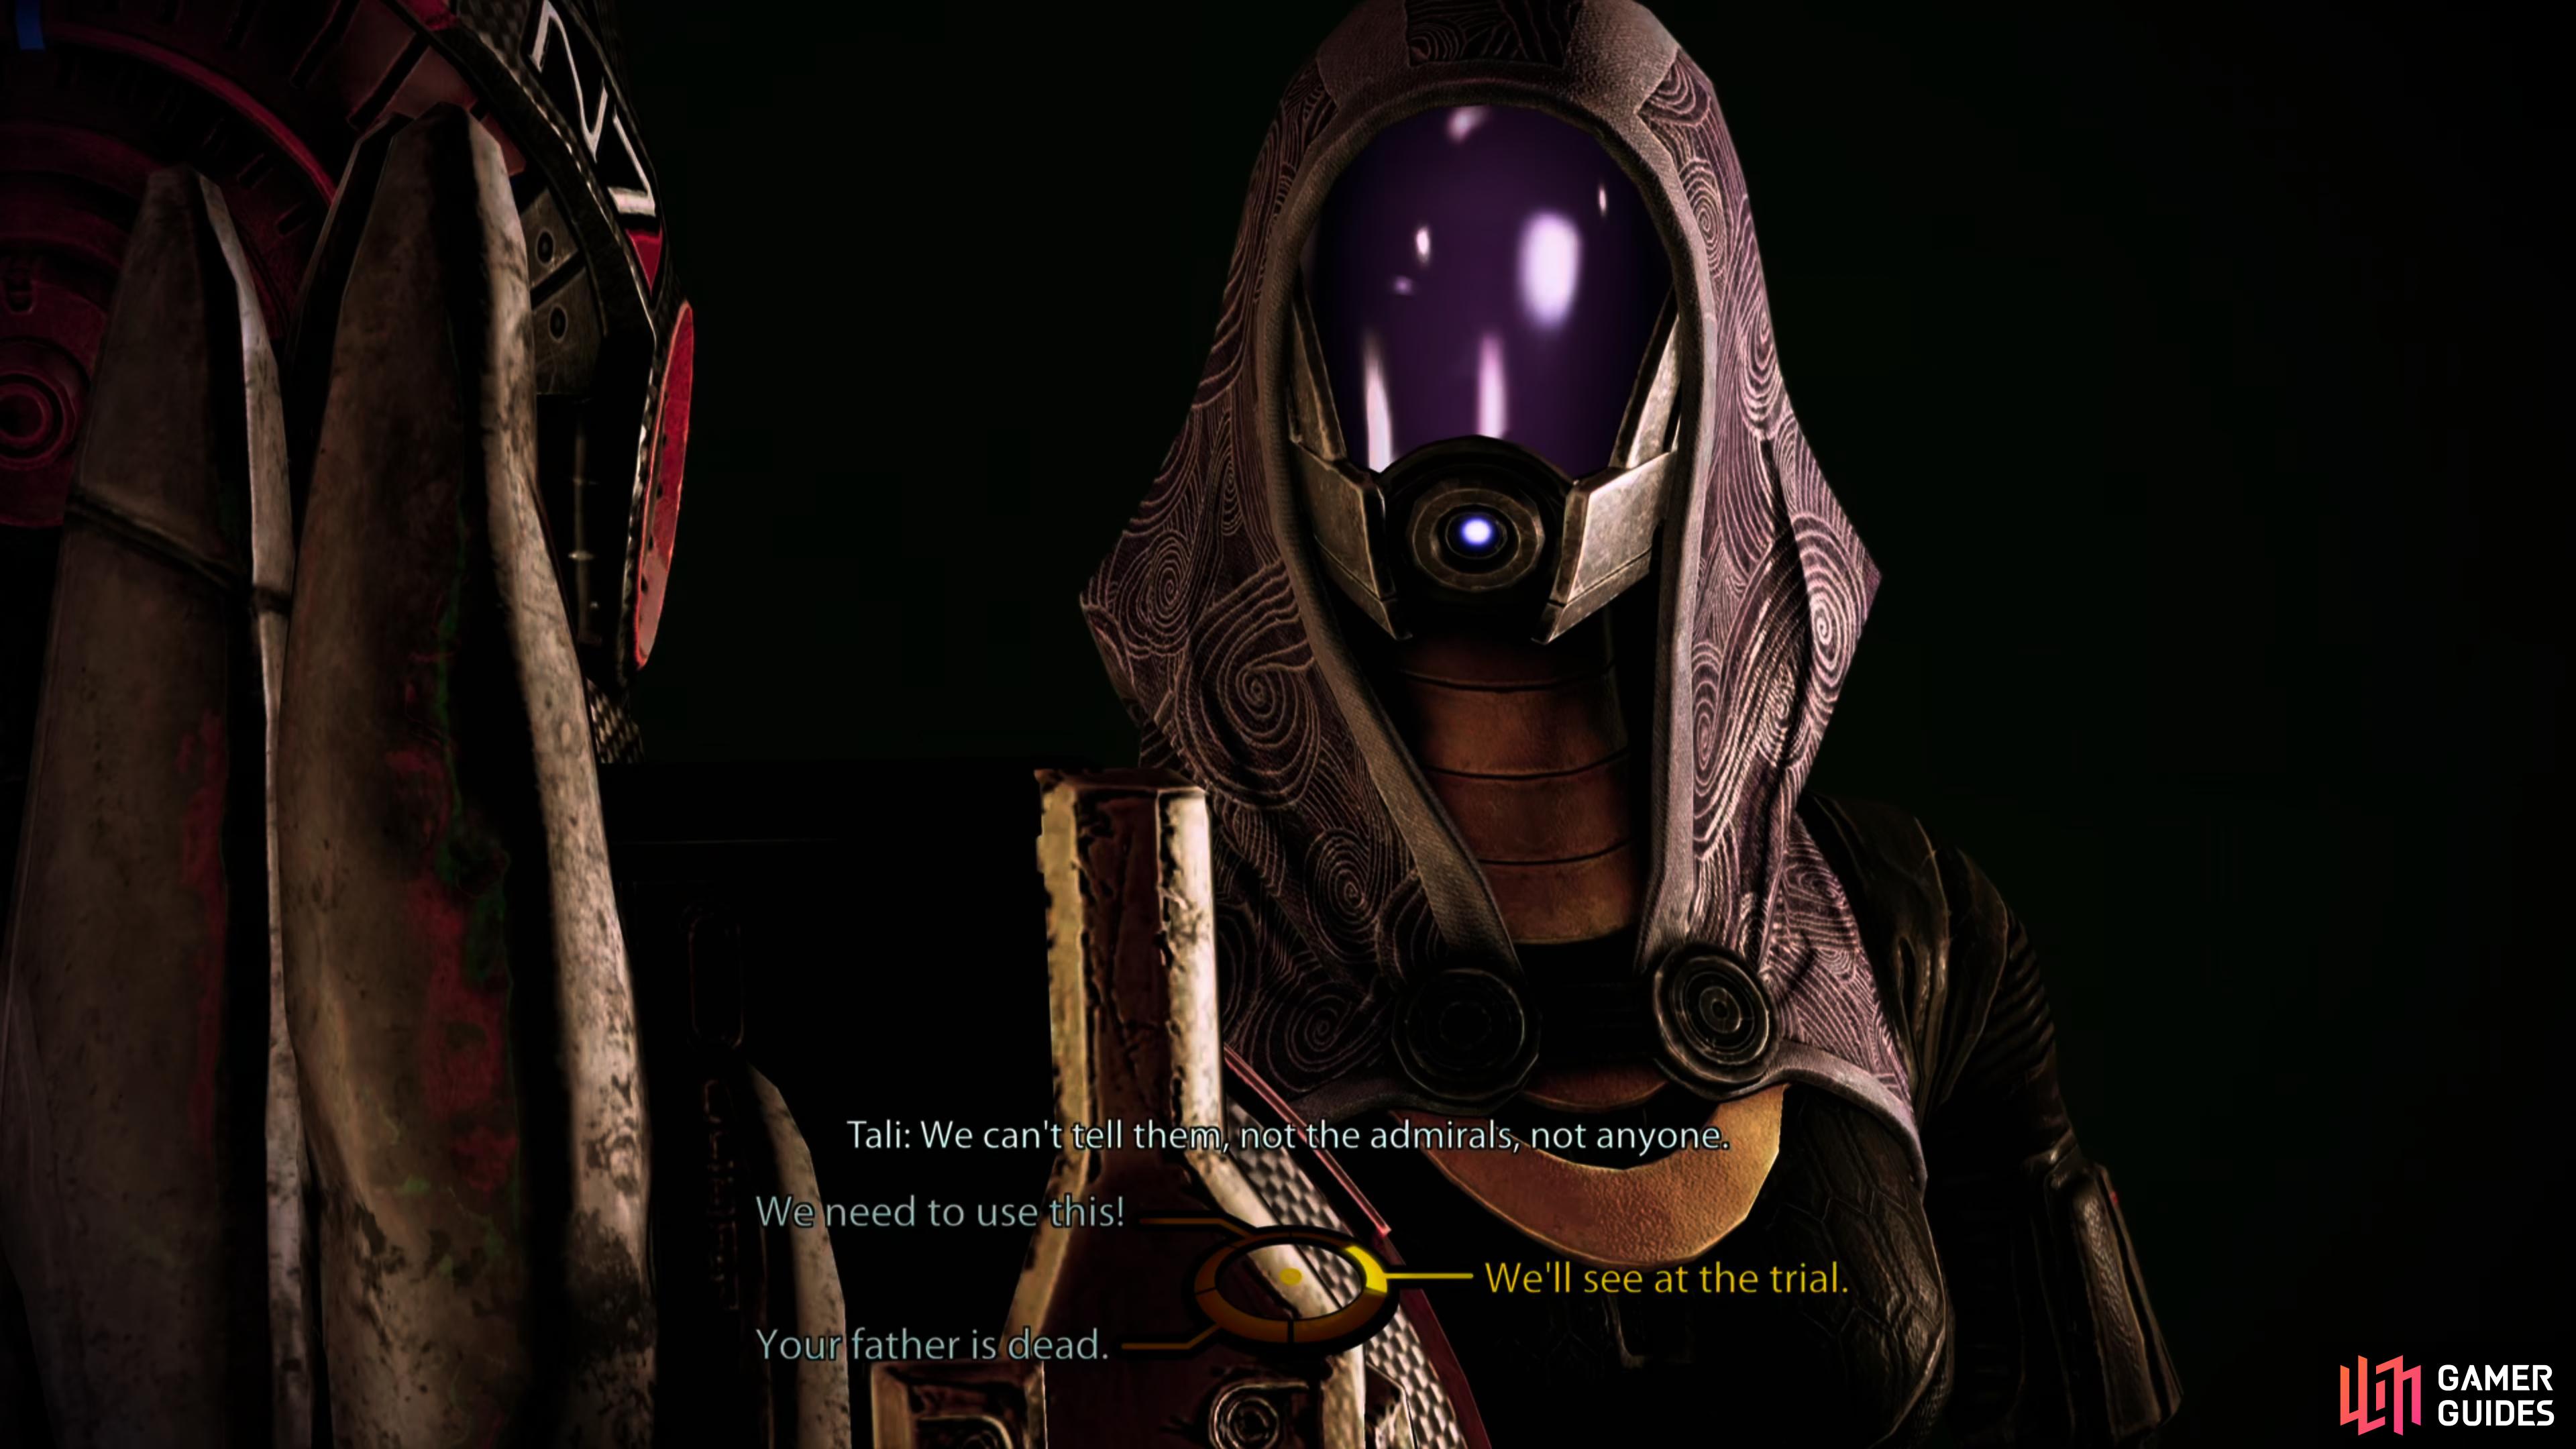 after which Tali will ask you to cover up what her father was doing.